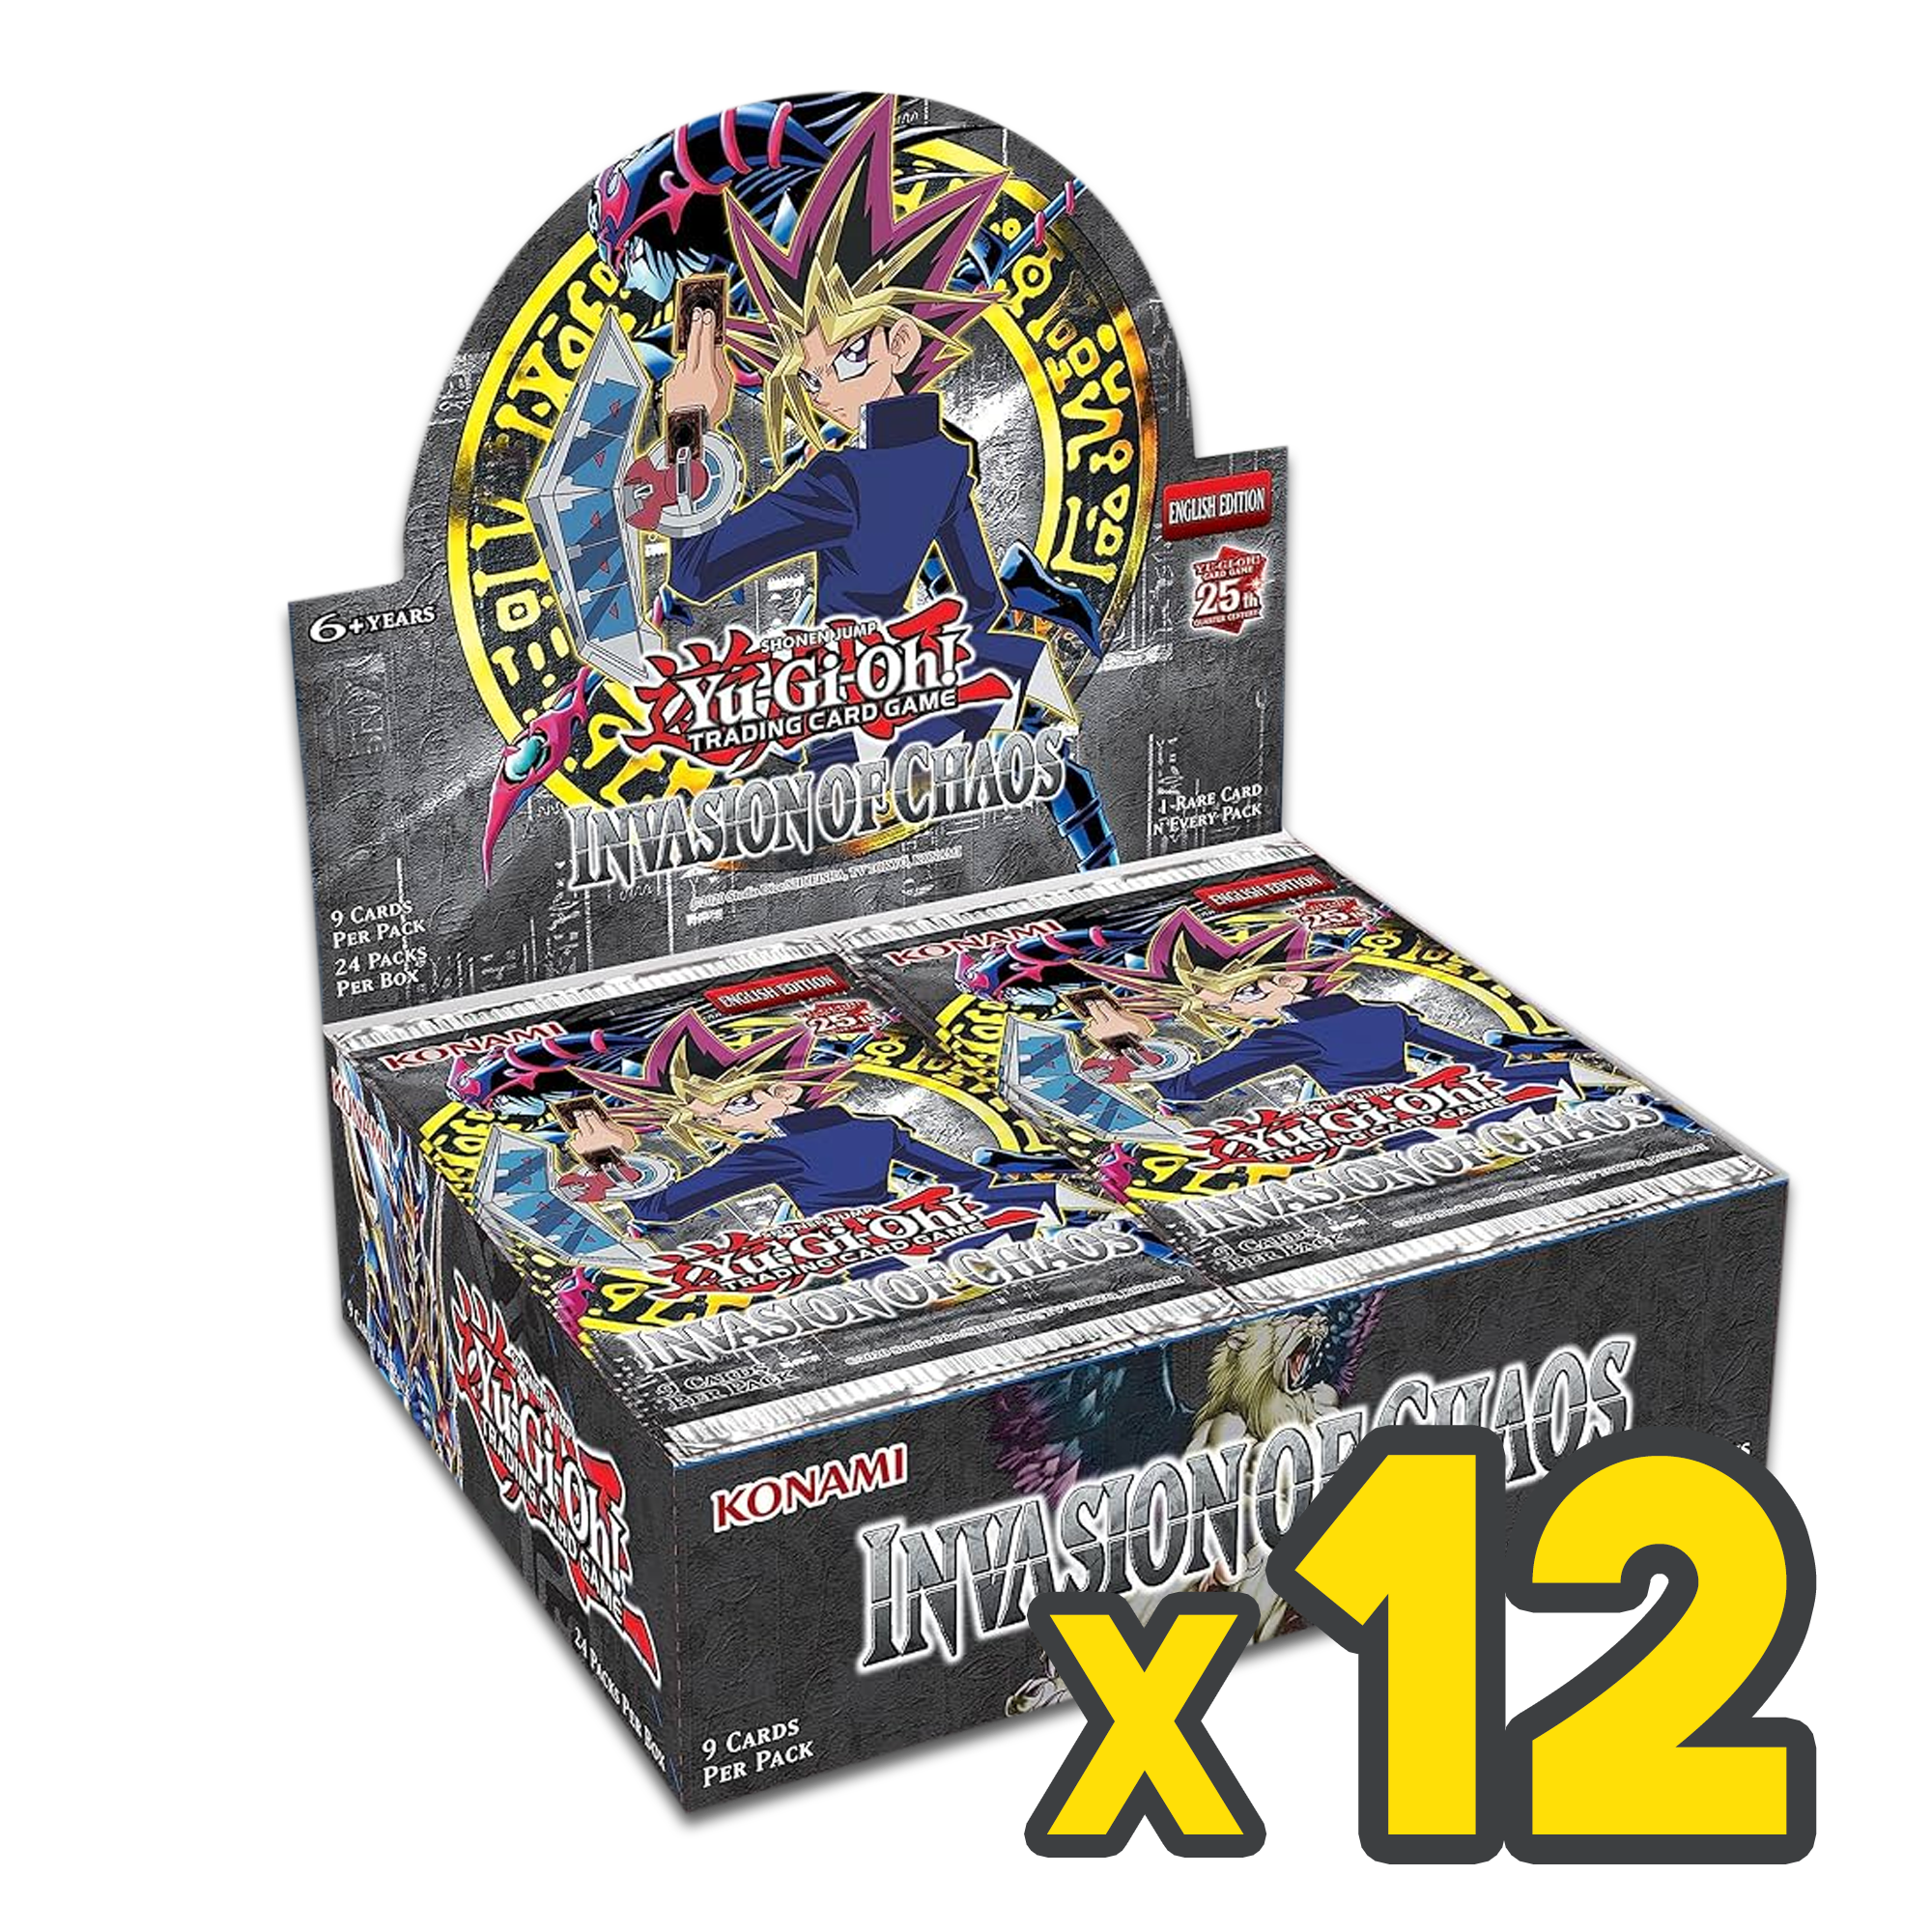 Invasion of Chaos Booster Case 25th Anniversary Edition